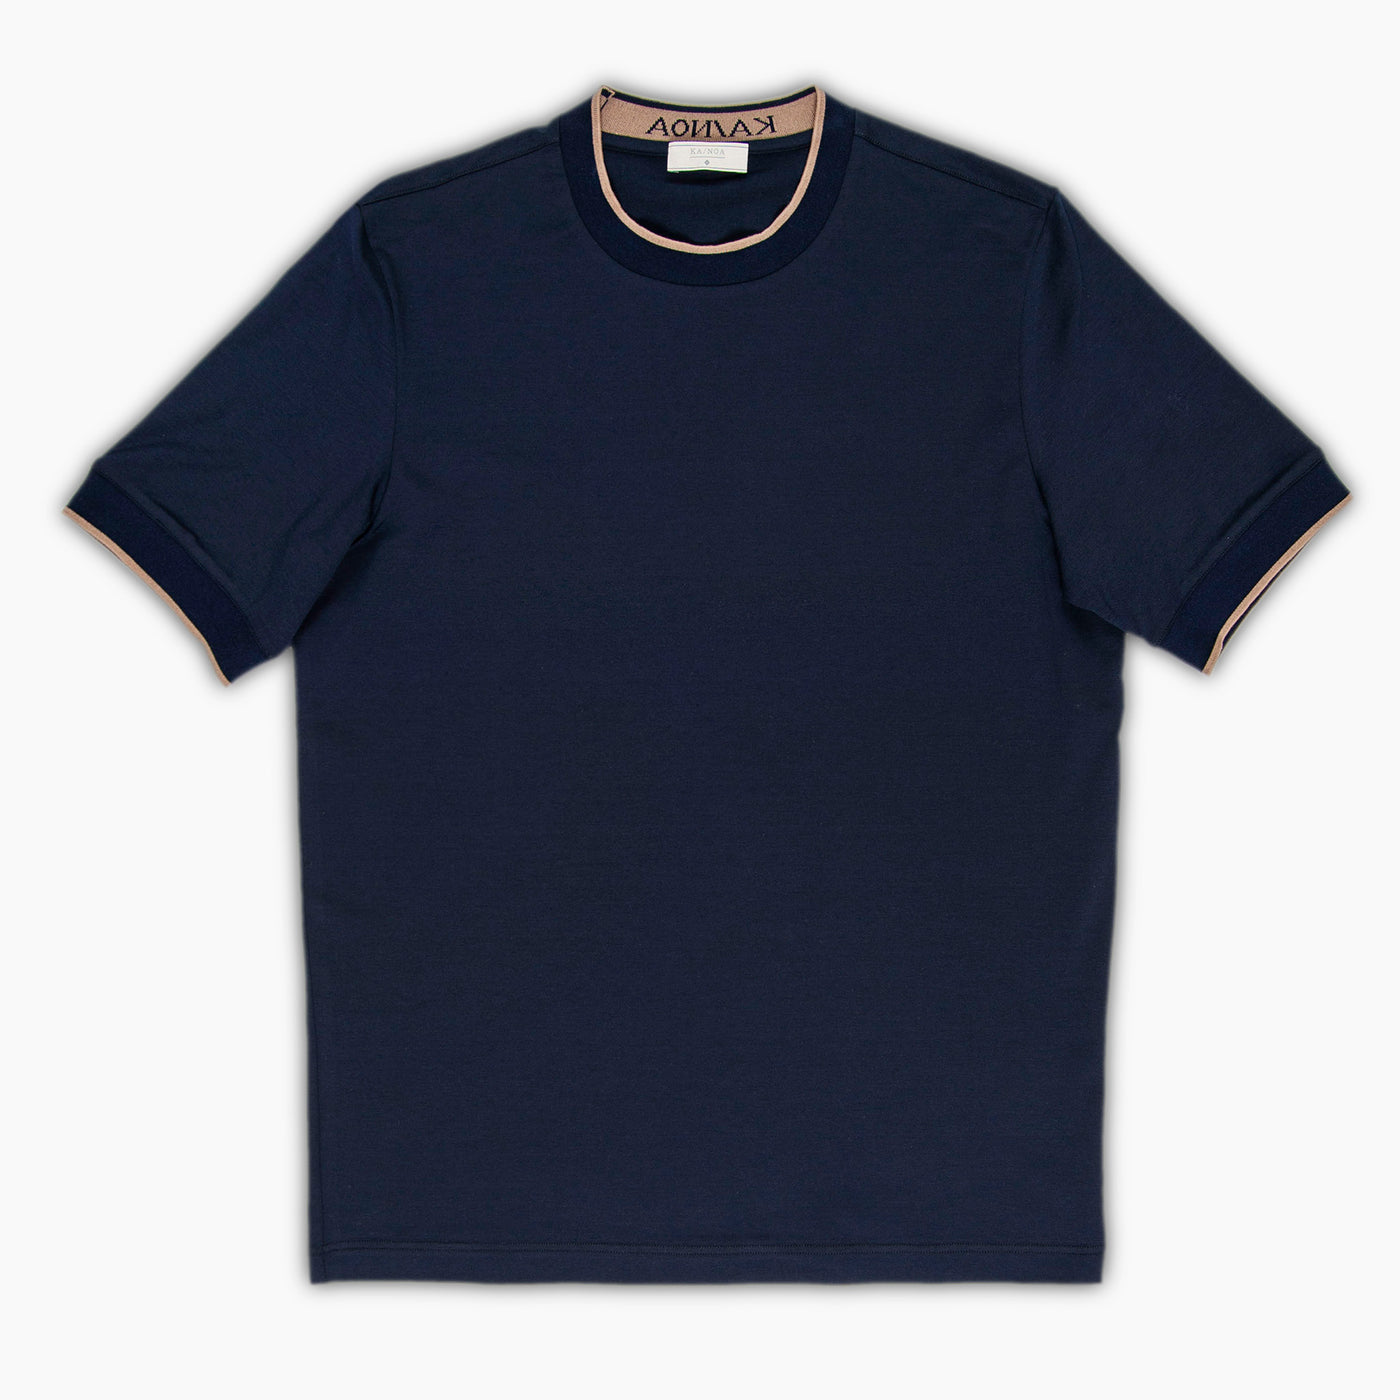 Falco short sleeved T shirt crew neck with stripe